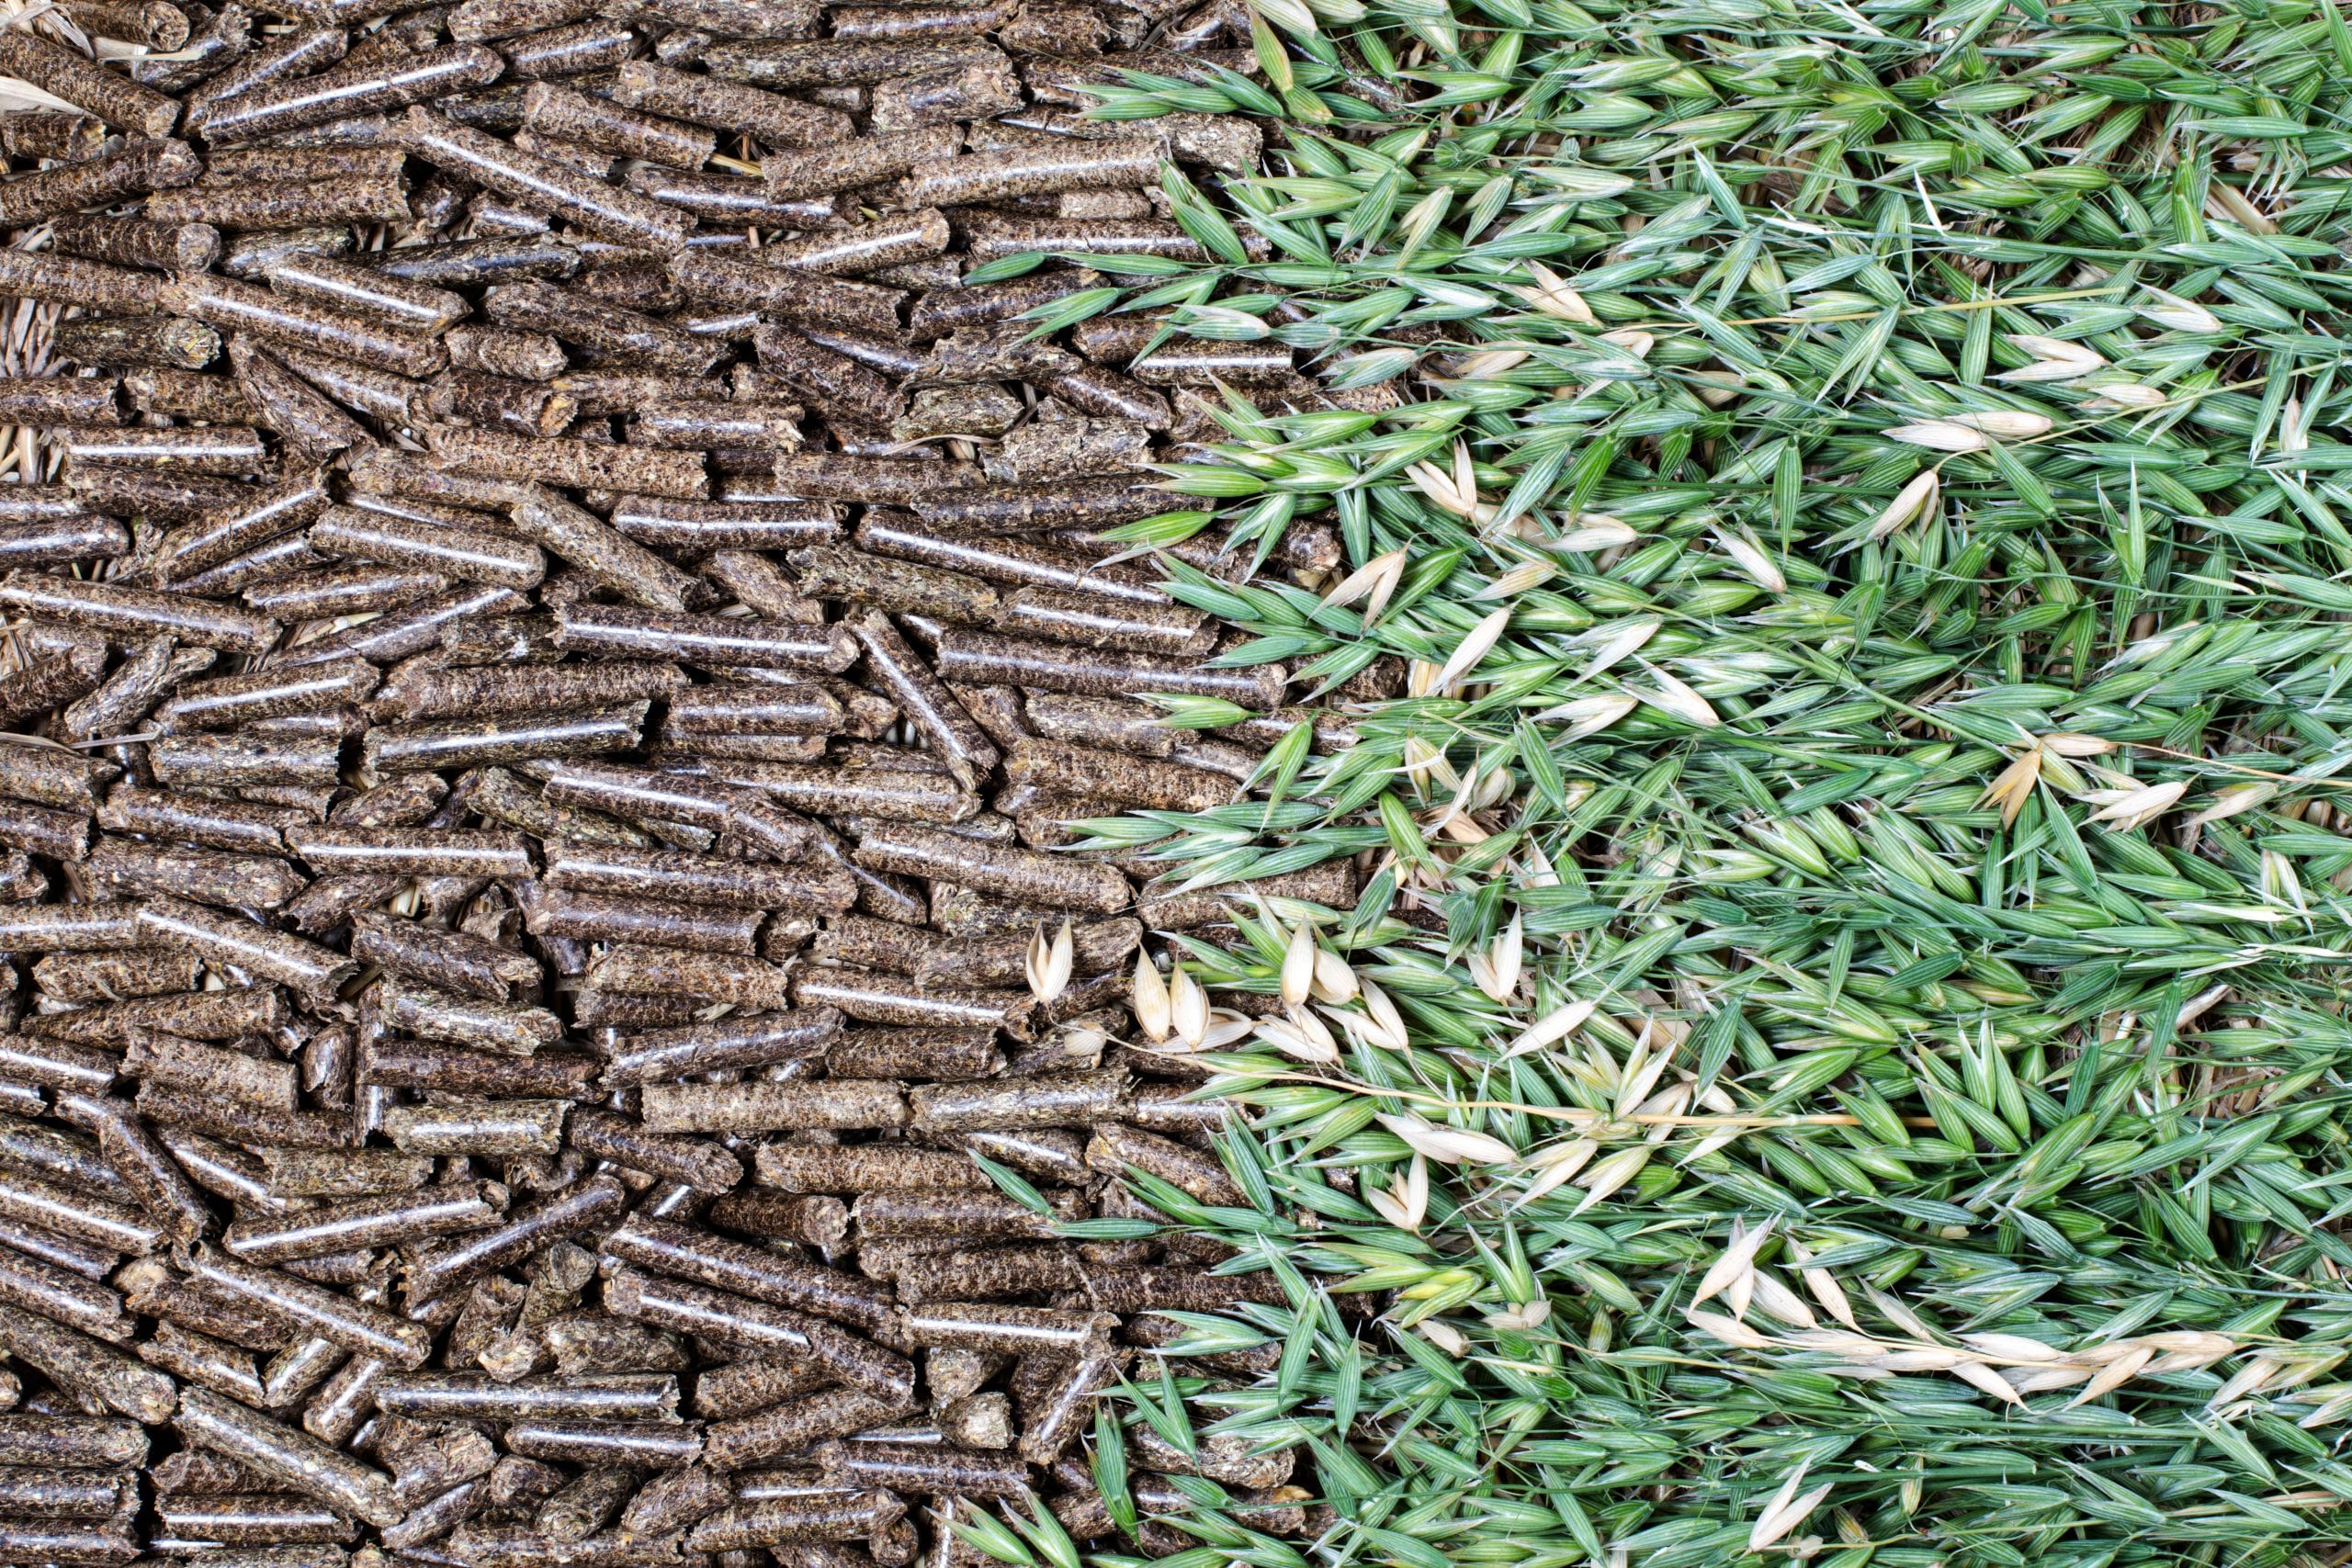 Image of straw pellets and agricultural waste. EQTEC are marketing leaders in the gasification industry. Click to find out more.